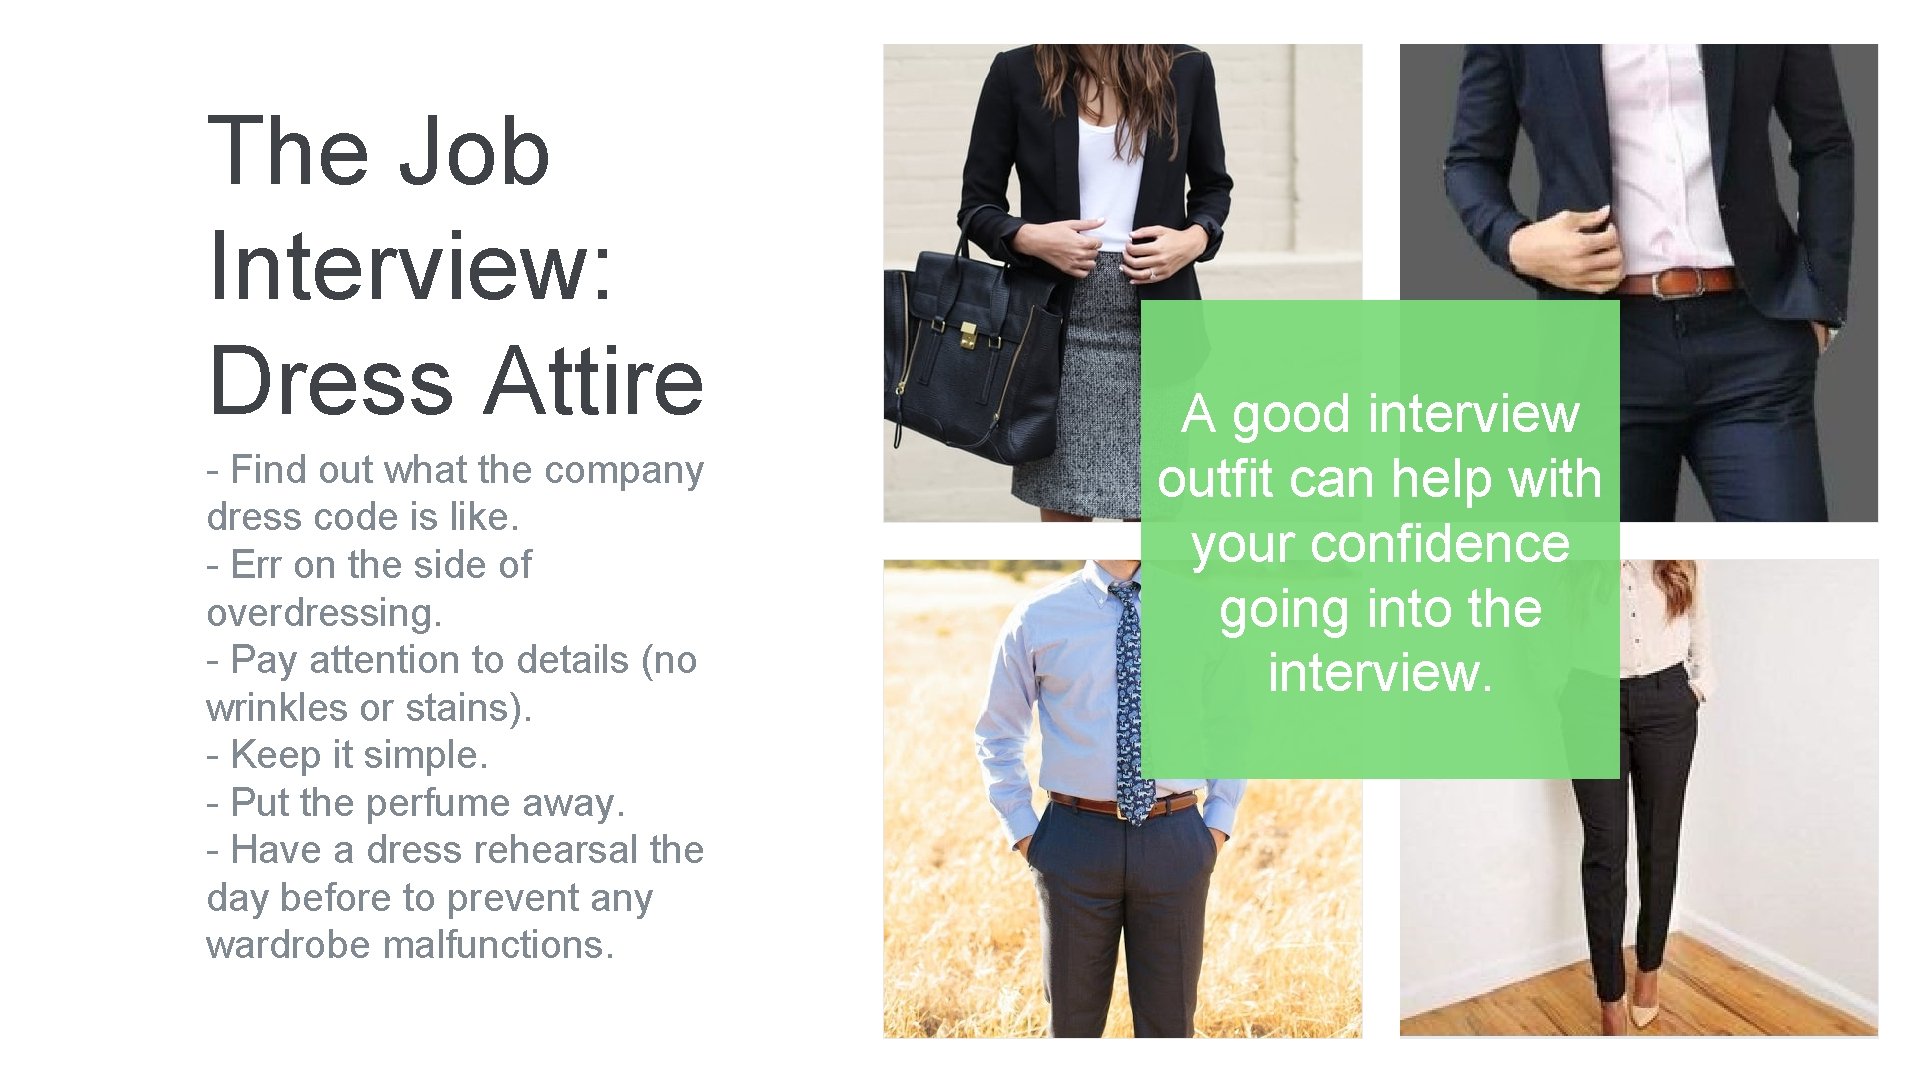 The Job Interview: Dress Attire - Find out what the company dress code is